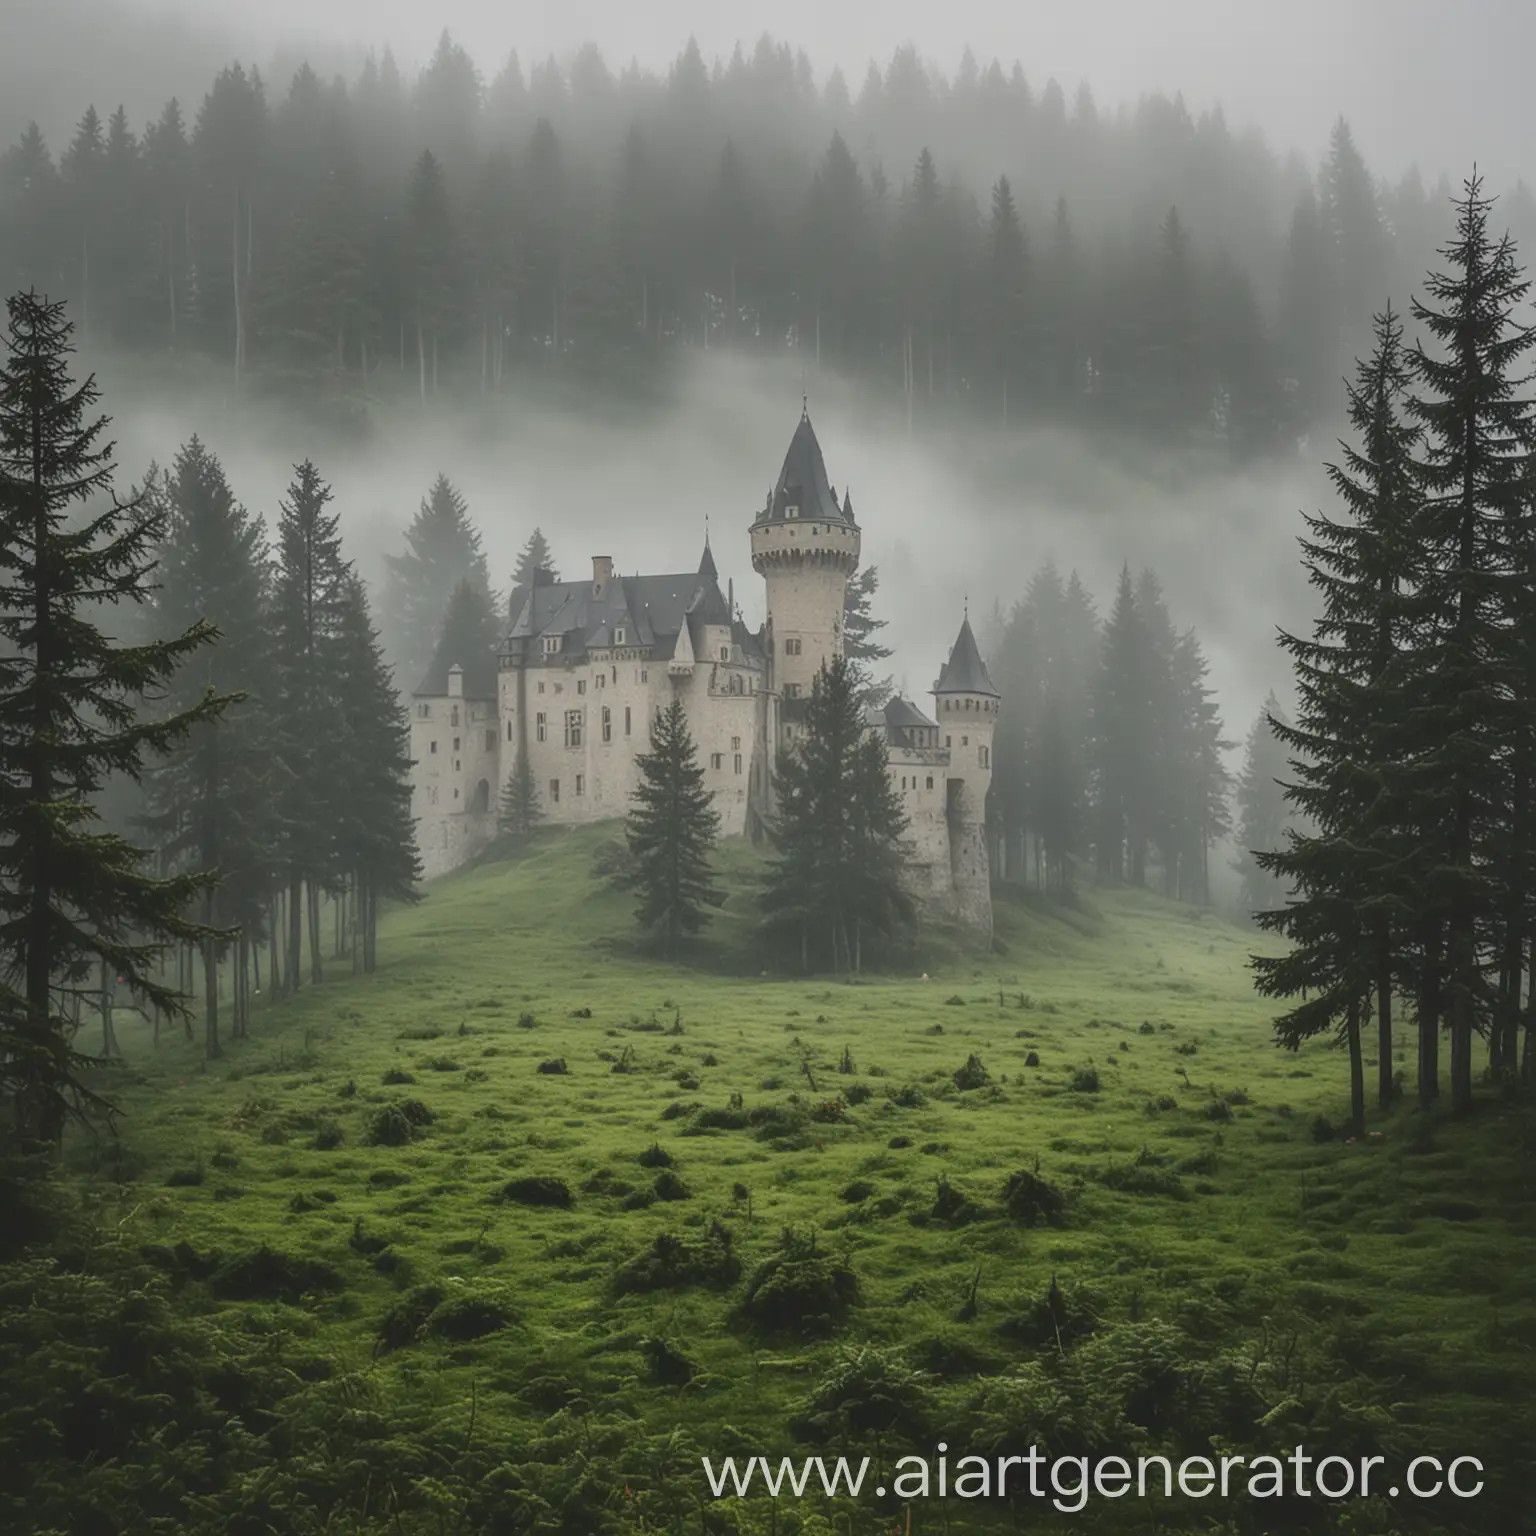 Mysterious-Castle-in-Foggy-Forest-with-Green-Firs